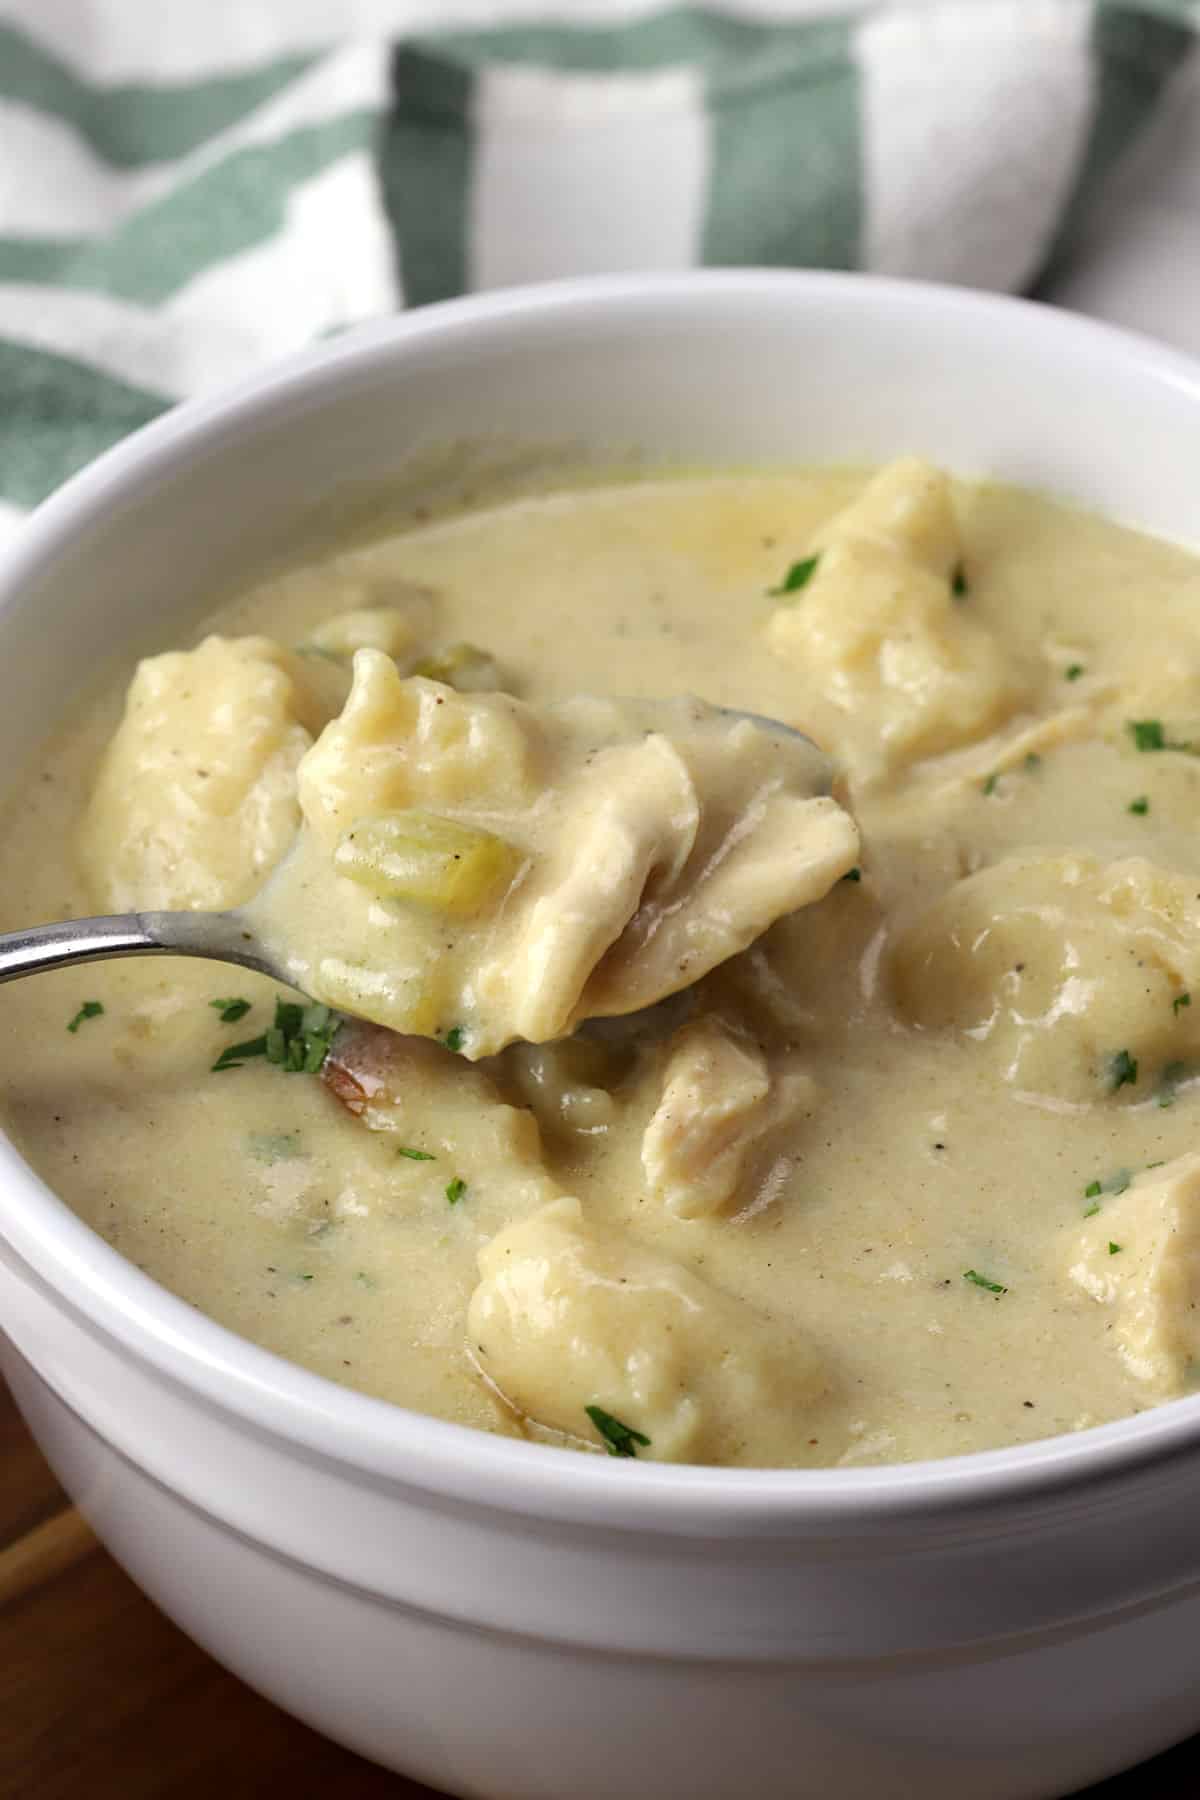 A metal spoon in a bowl of chicken and dumplings.